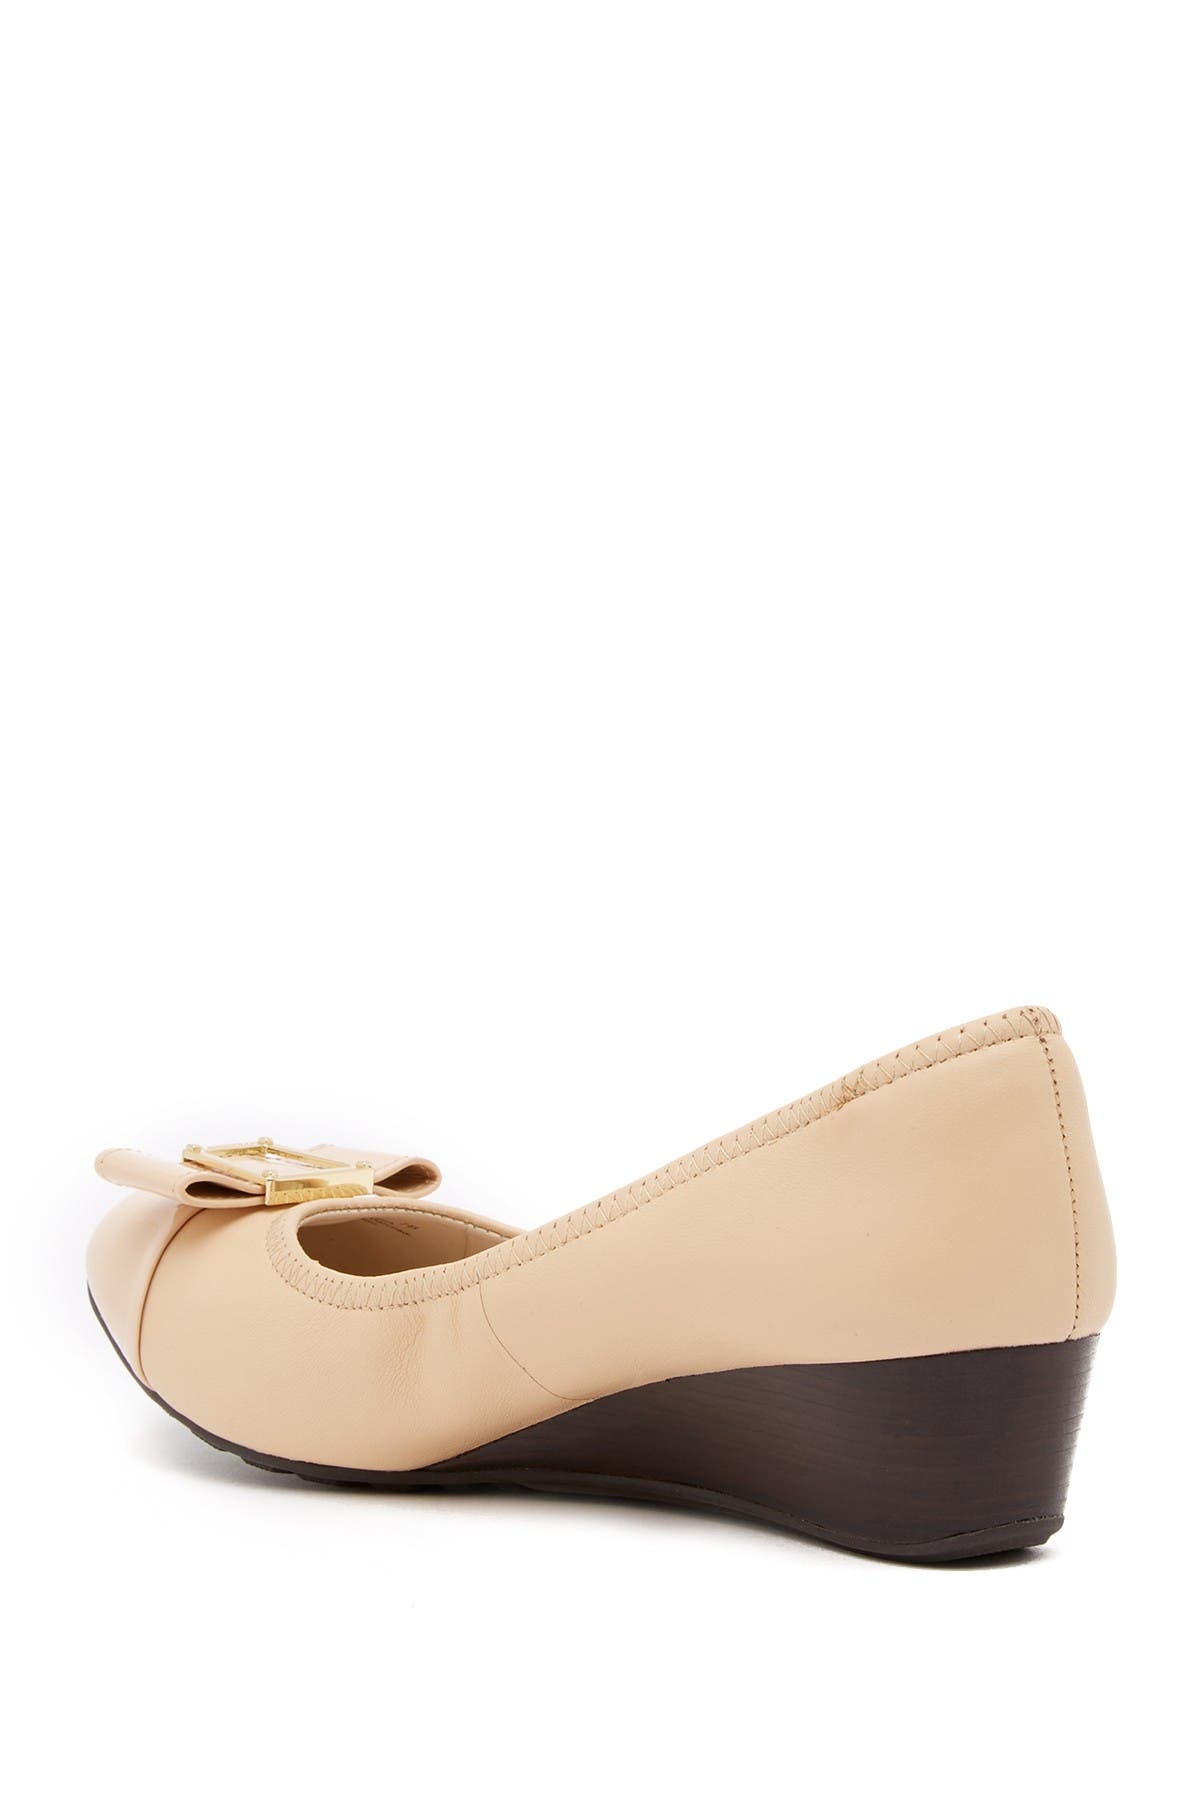 cole haan emory leather wedge pump